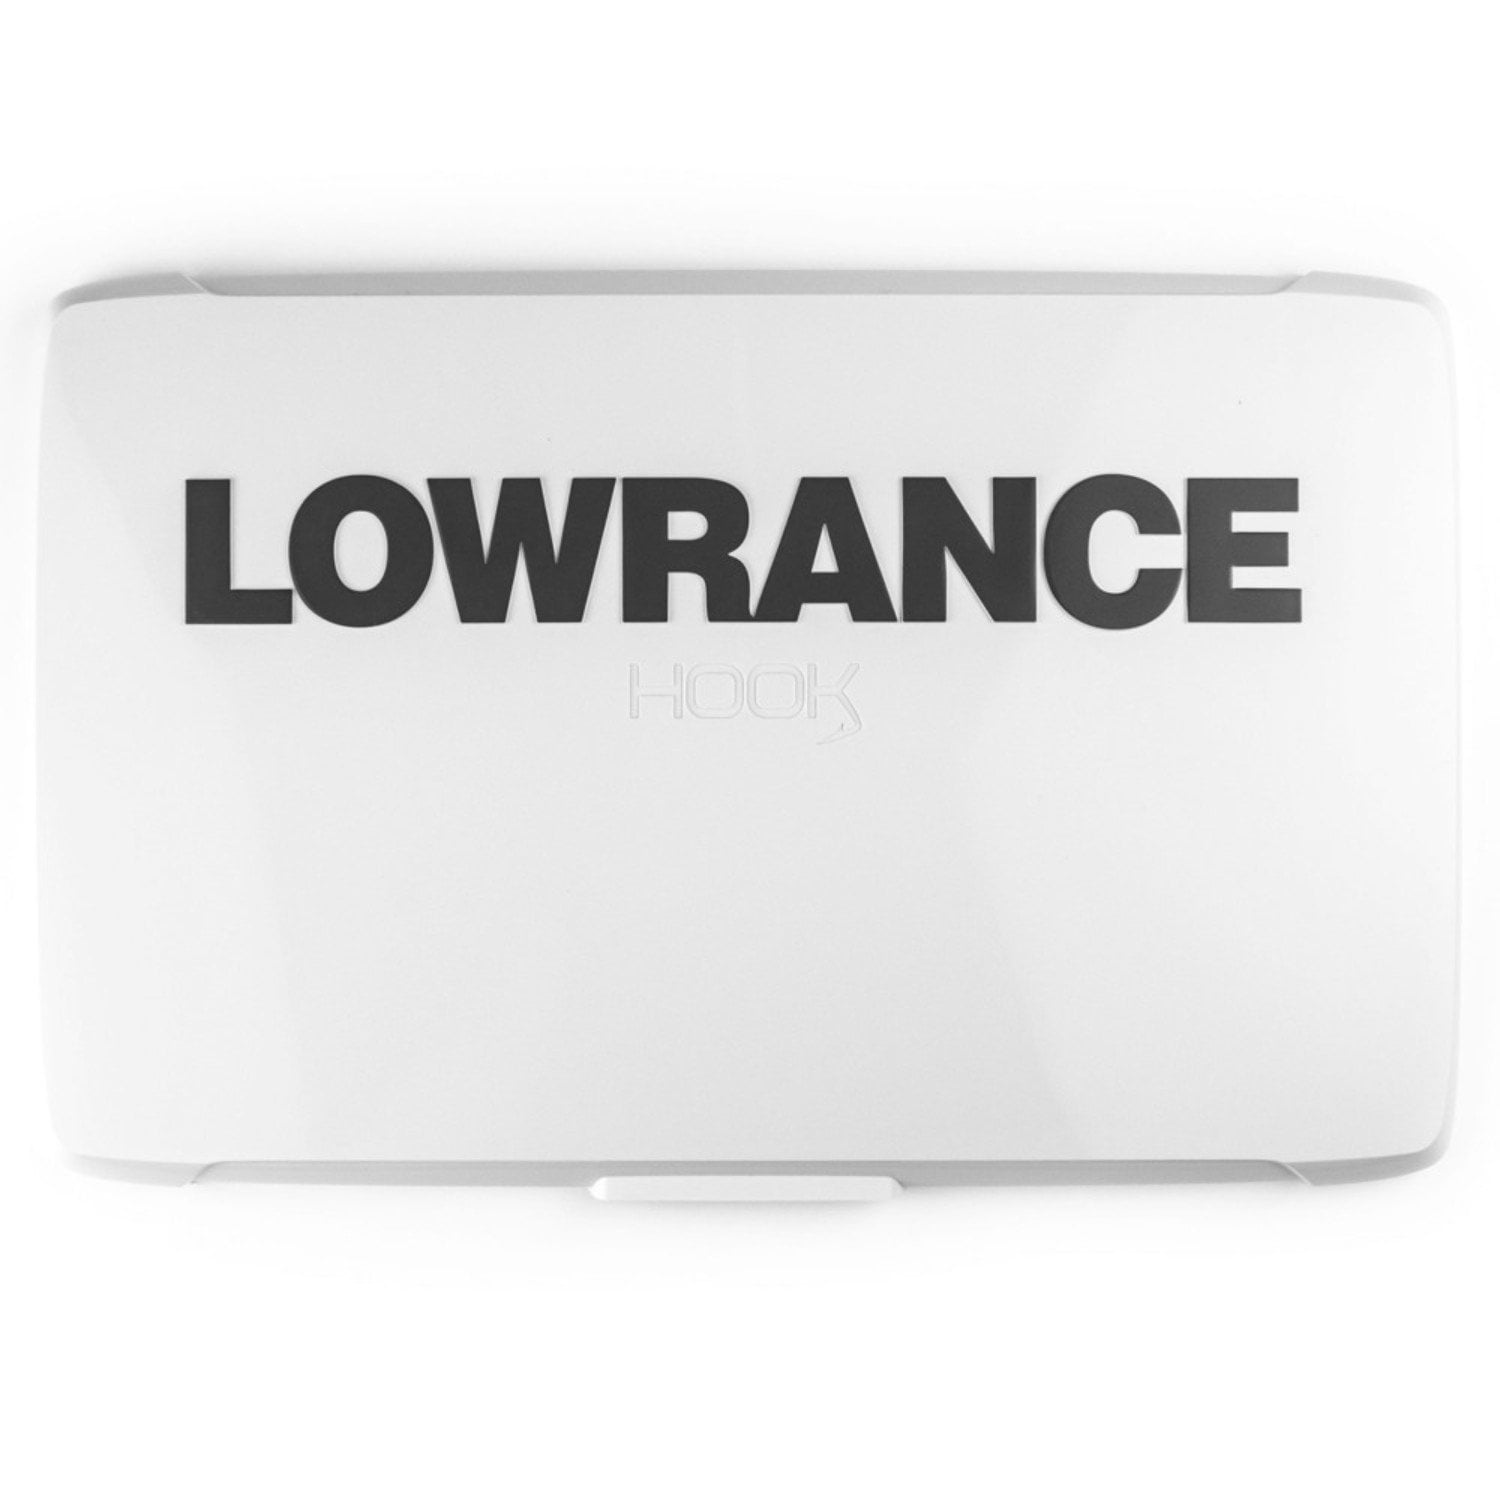 Lowrance 12-inch Fishfinder Sun Cover - Fits all HOOK2 12 Models 